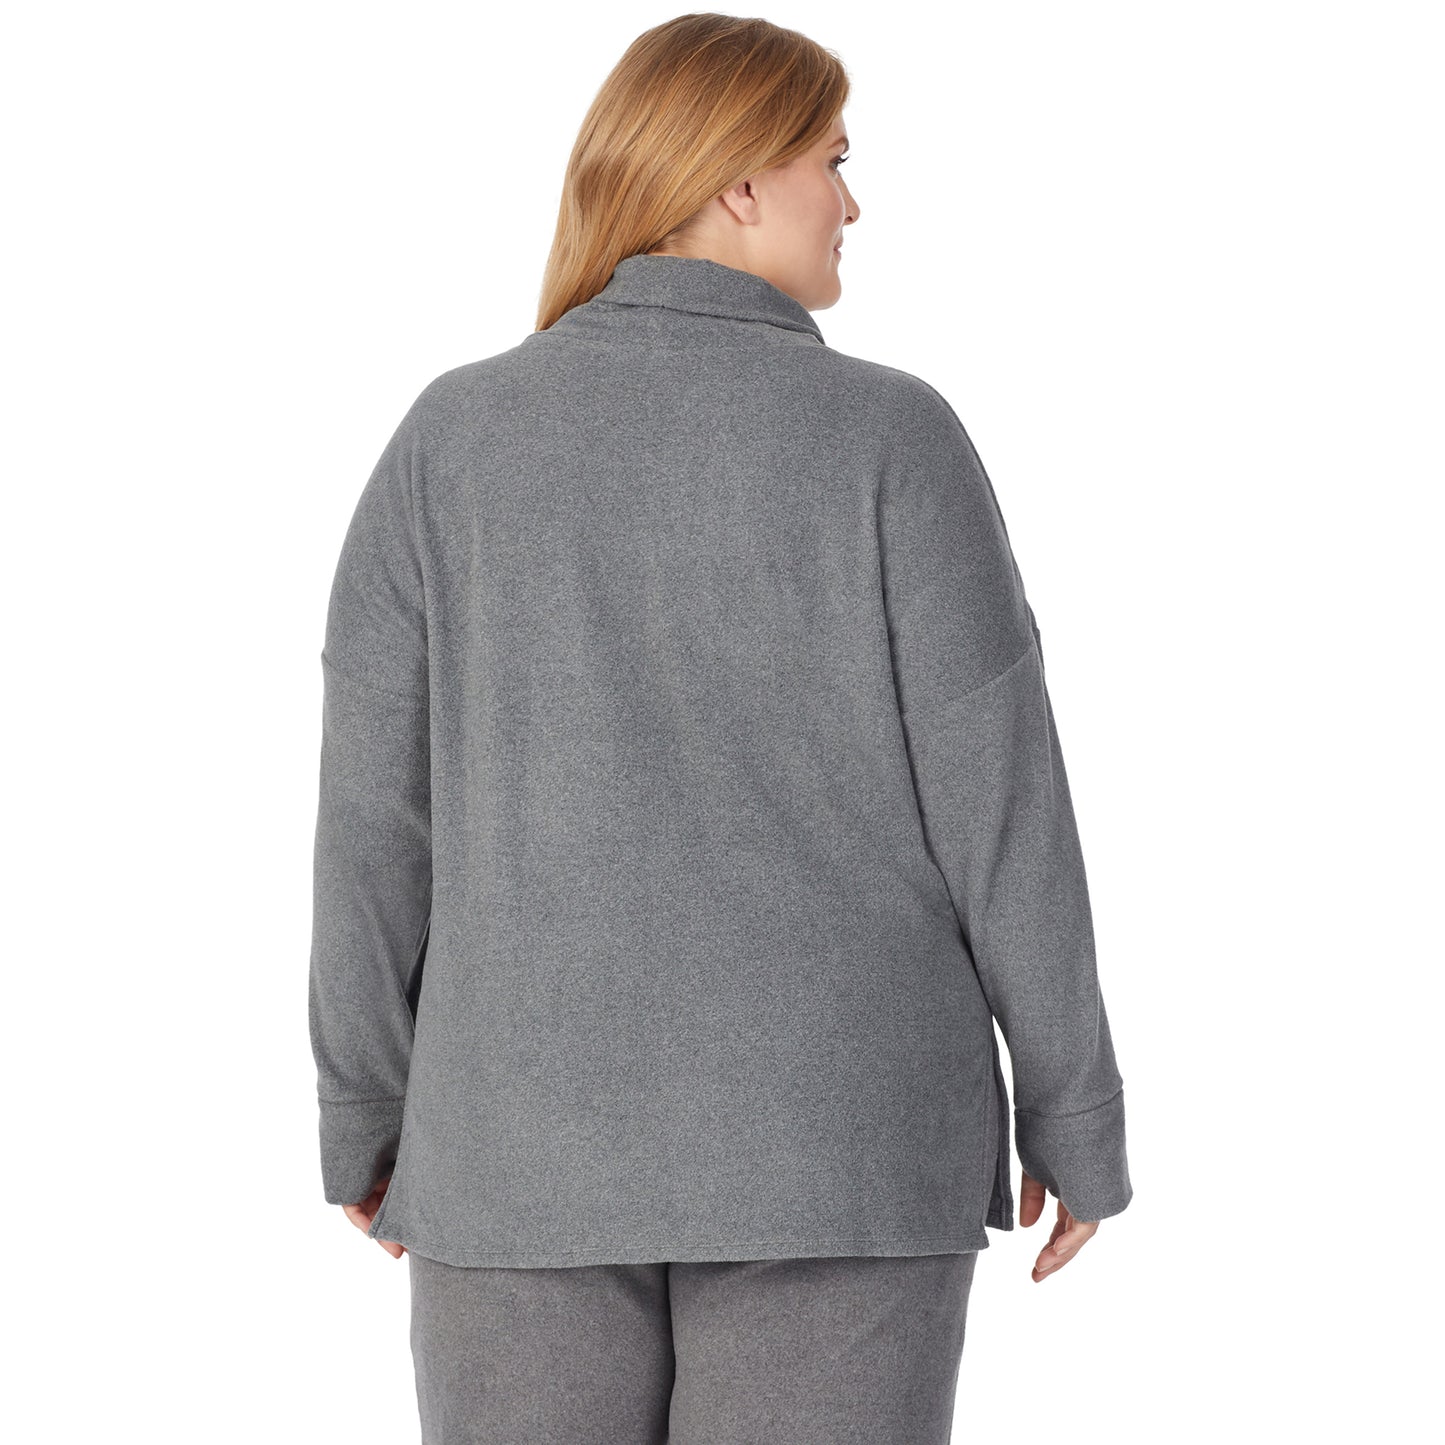 Charcoal Heather; Model is wearing size 1X. She is 5'9", Bust 38", Waist 36", Hips 48.5".@upper body of a lady wearing grey long sleeve tunic